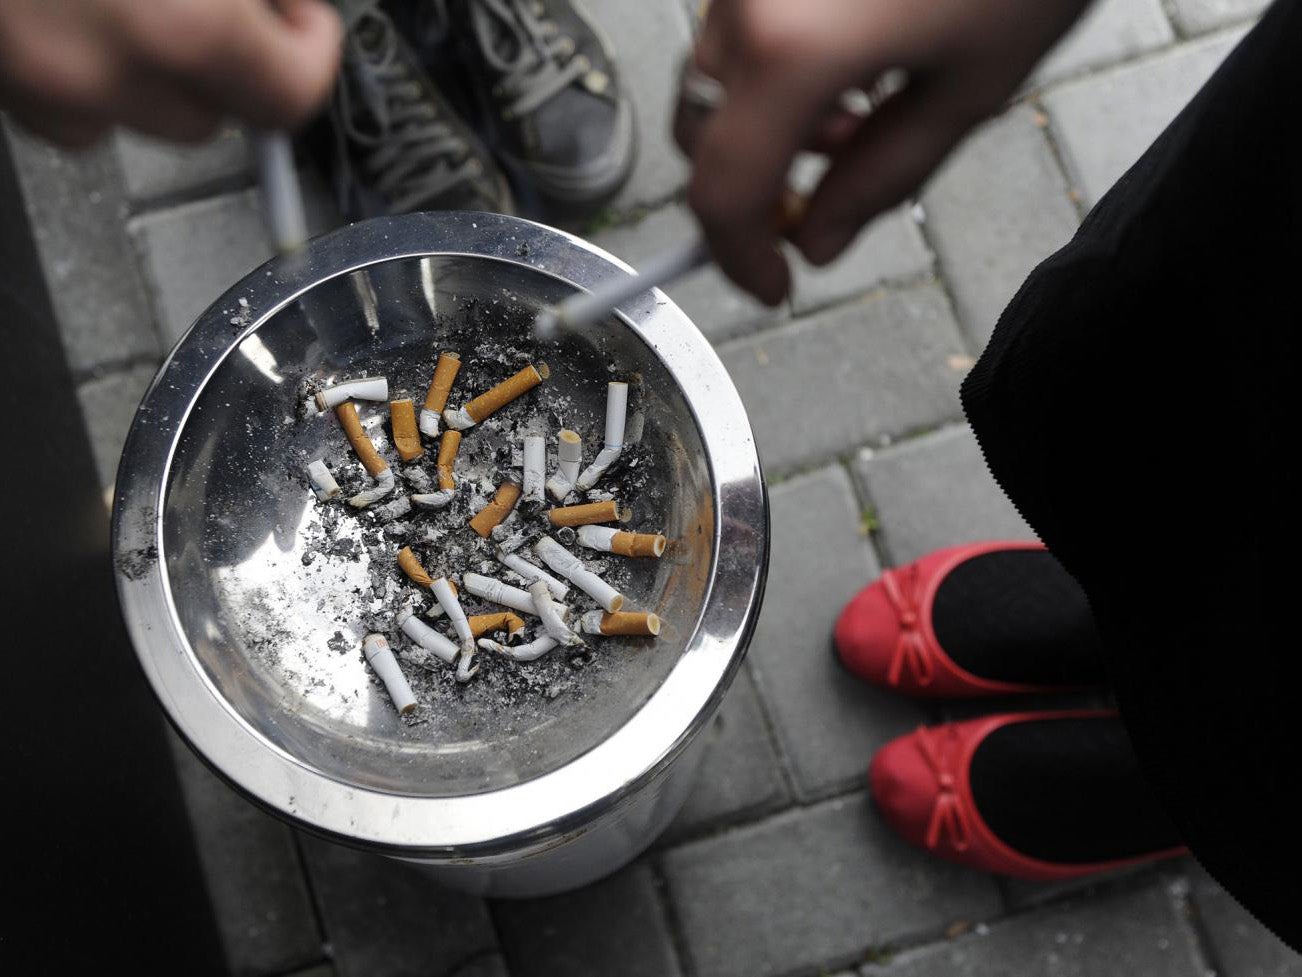 It has been illegal to smoke in an enclosed public place in England since 1 July, 2007